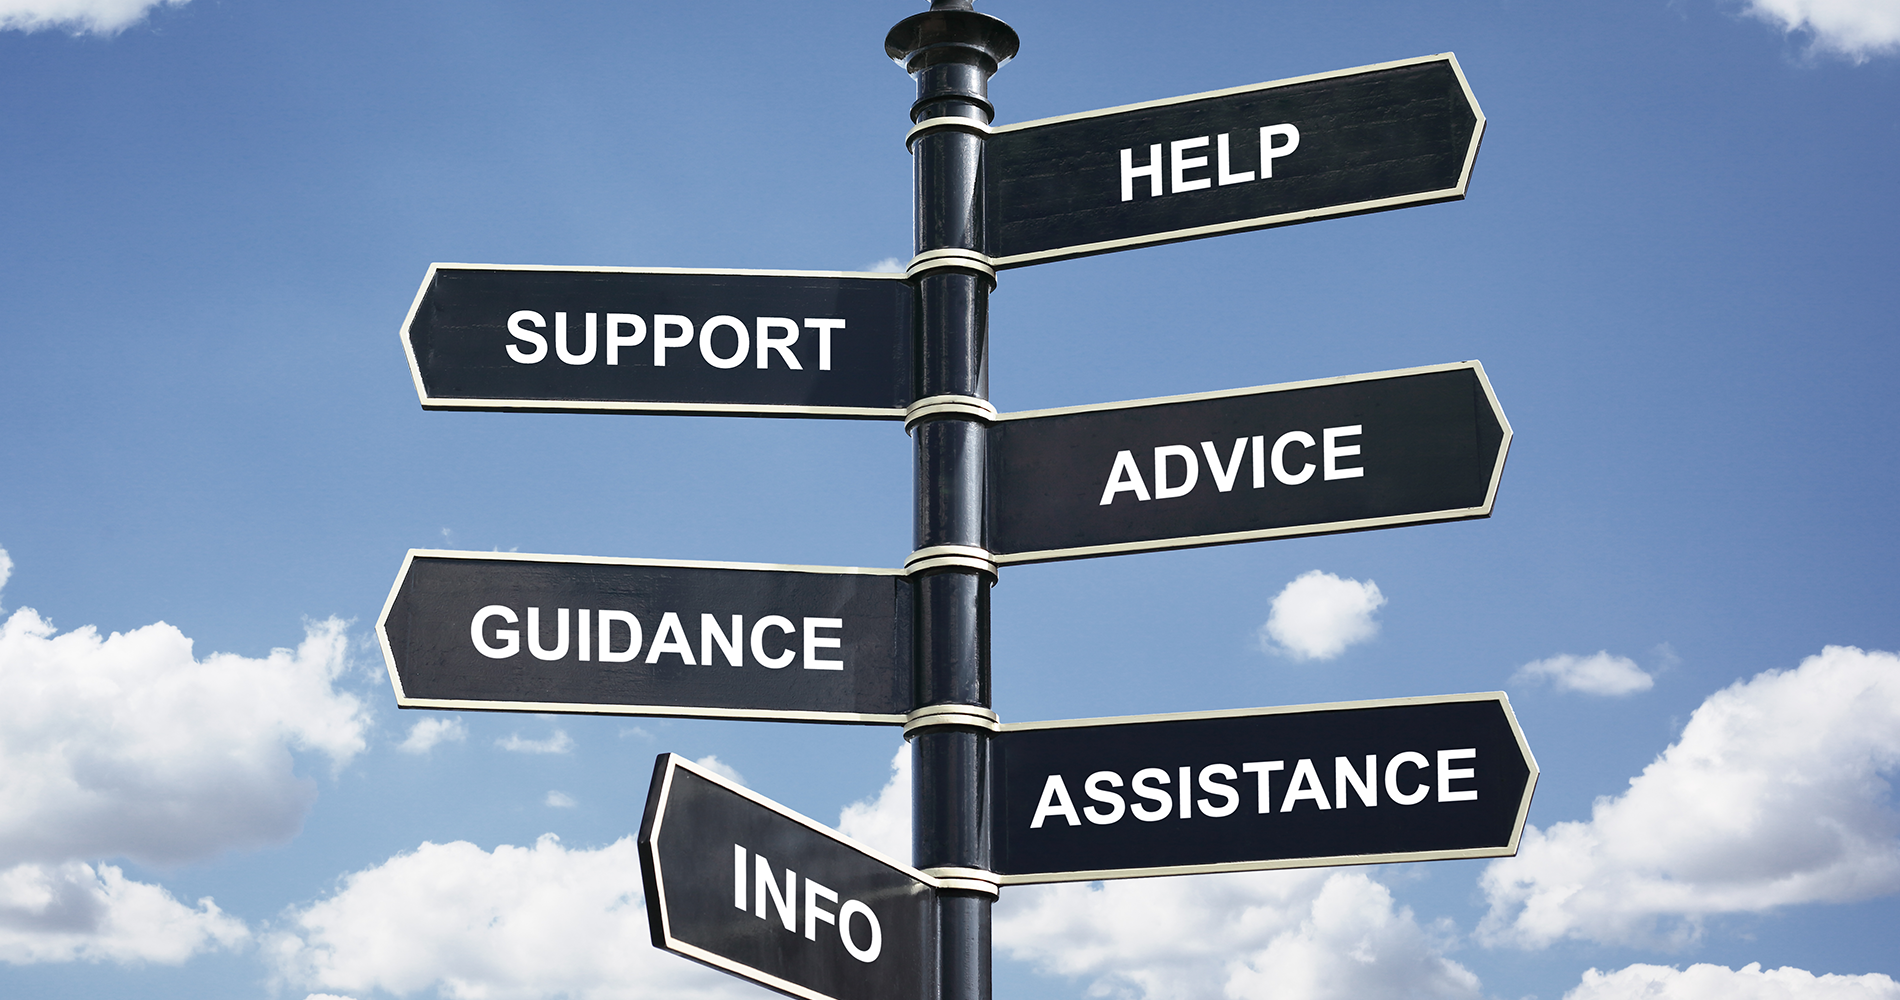 Sign post with signs for help, support, advice, guidance, assistance and info